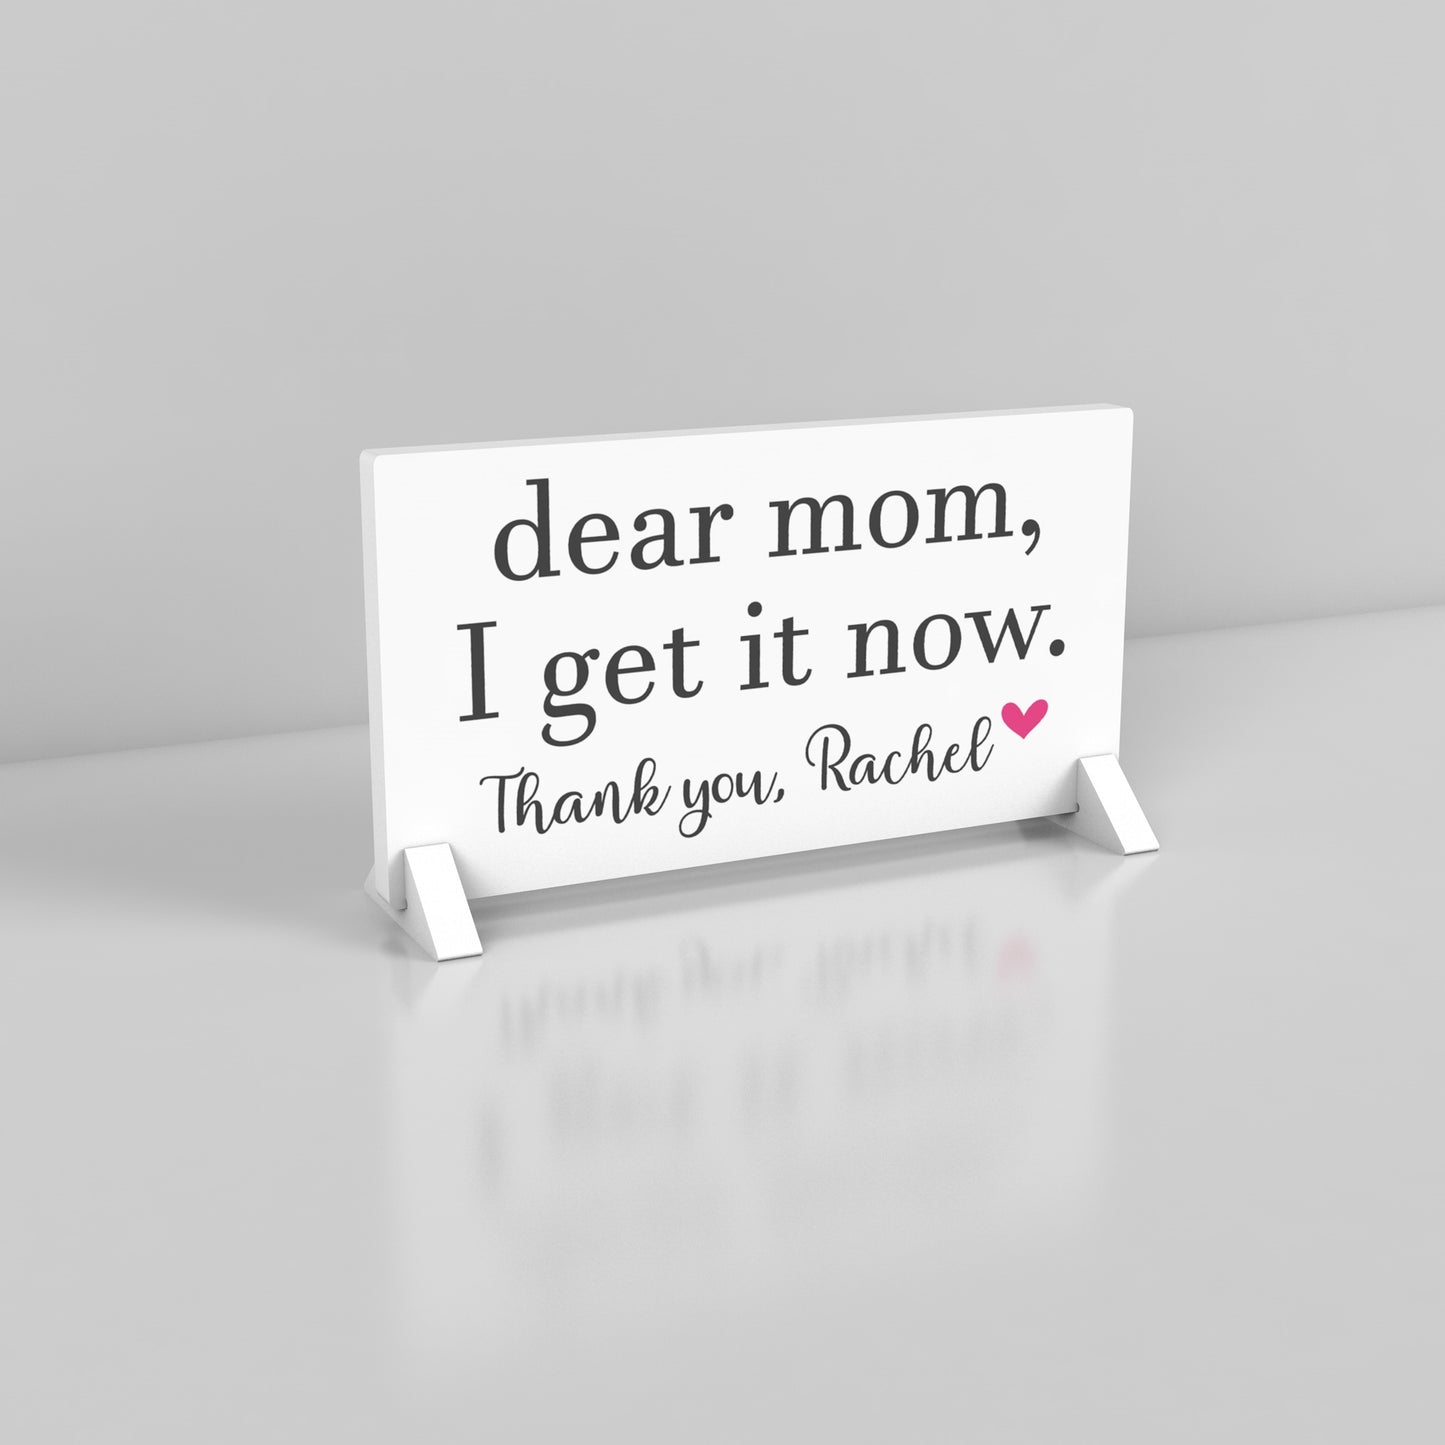 Mother's Day Gift Idea for Mom - Thank You Mom Sign - Gift For Mom From Kids - Dear Mom, I Get It Now